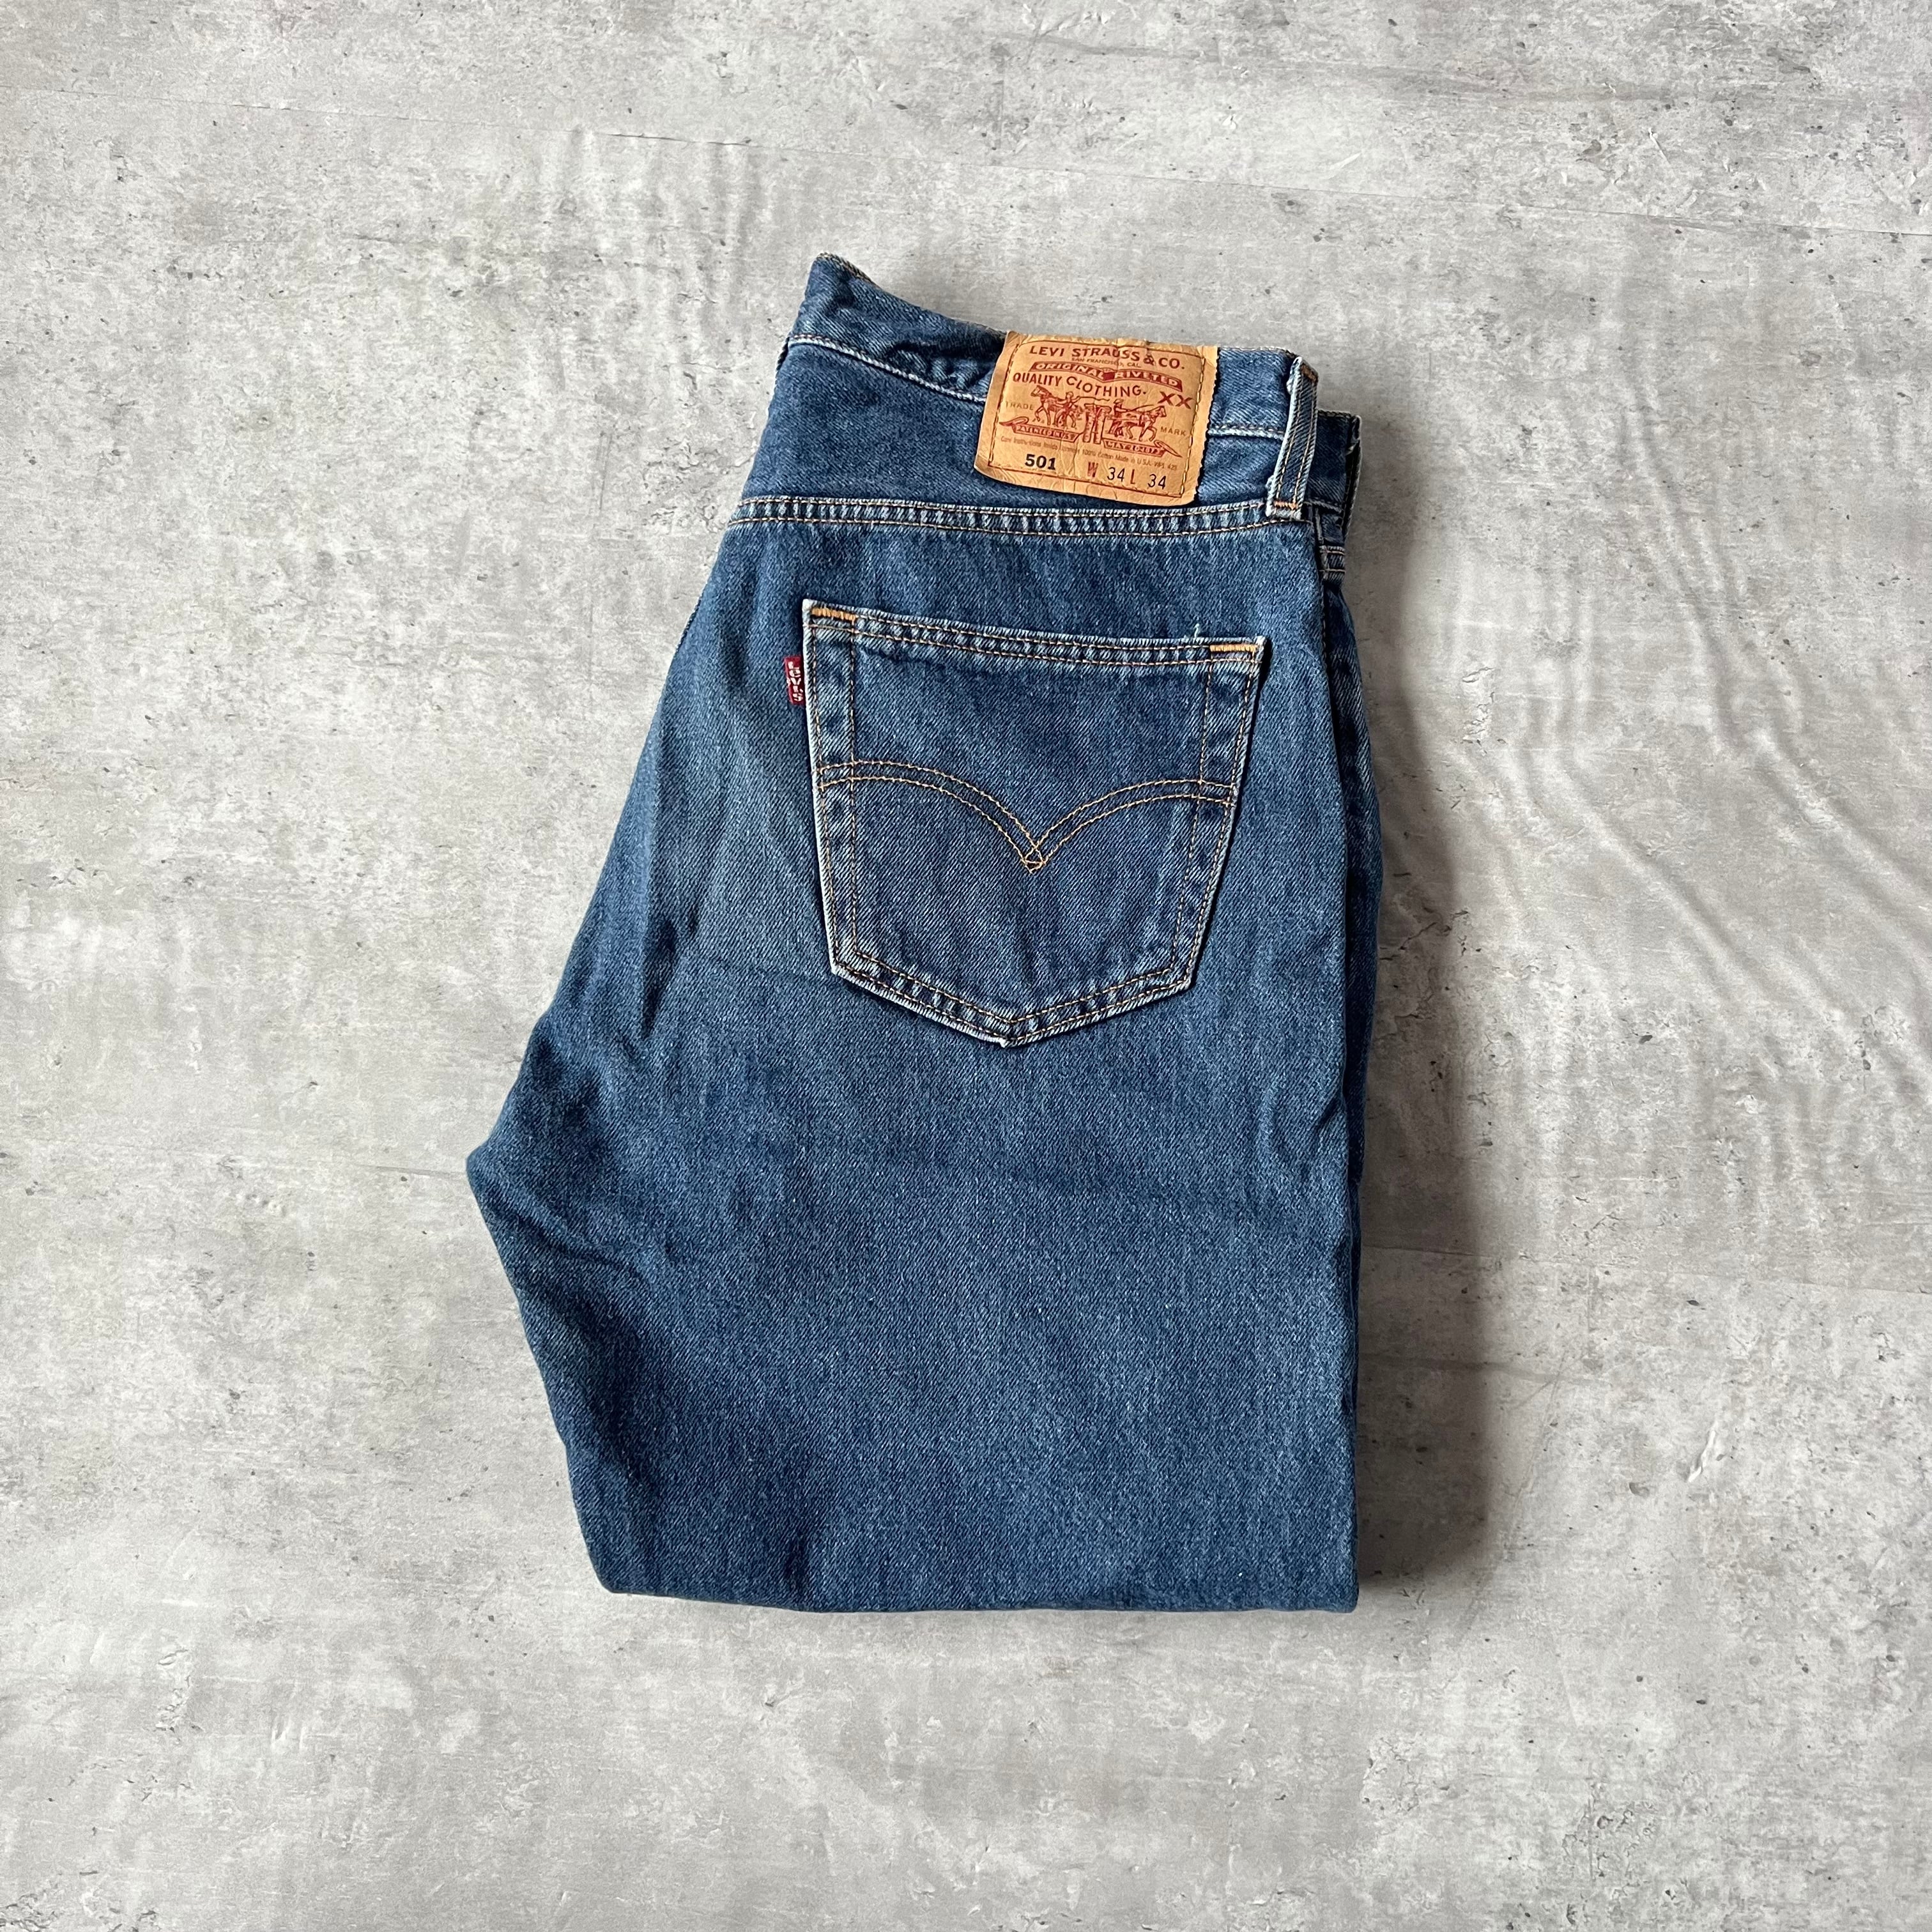 LEVI'S 501 90s MADE IN USA DENIM PANT